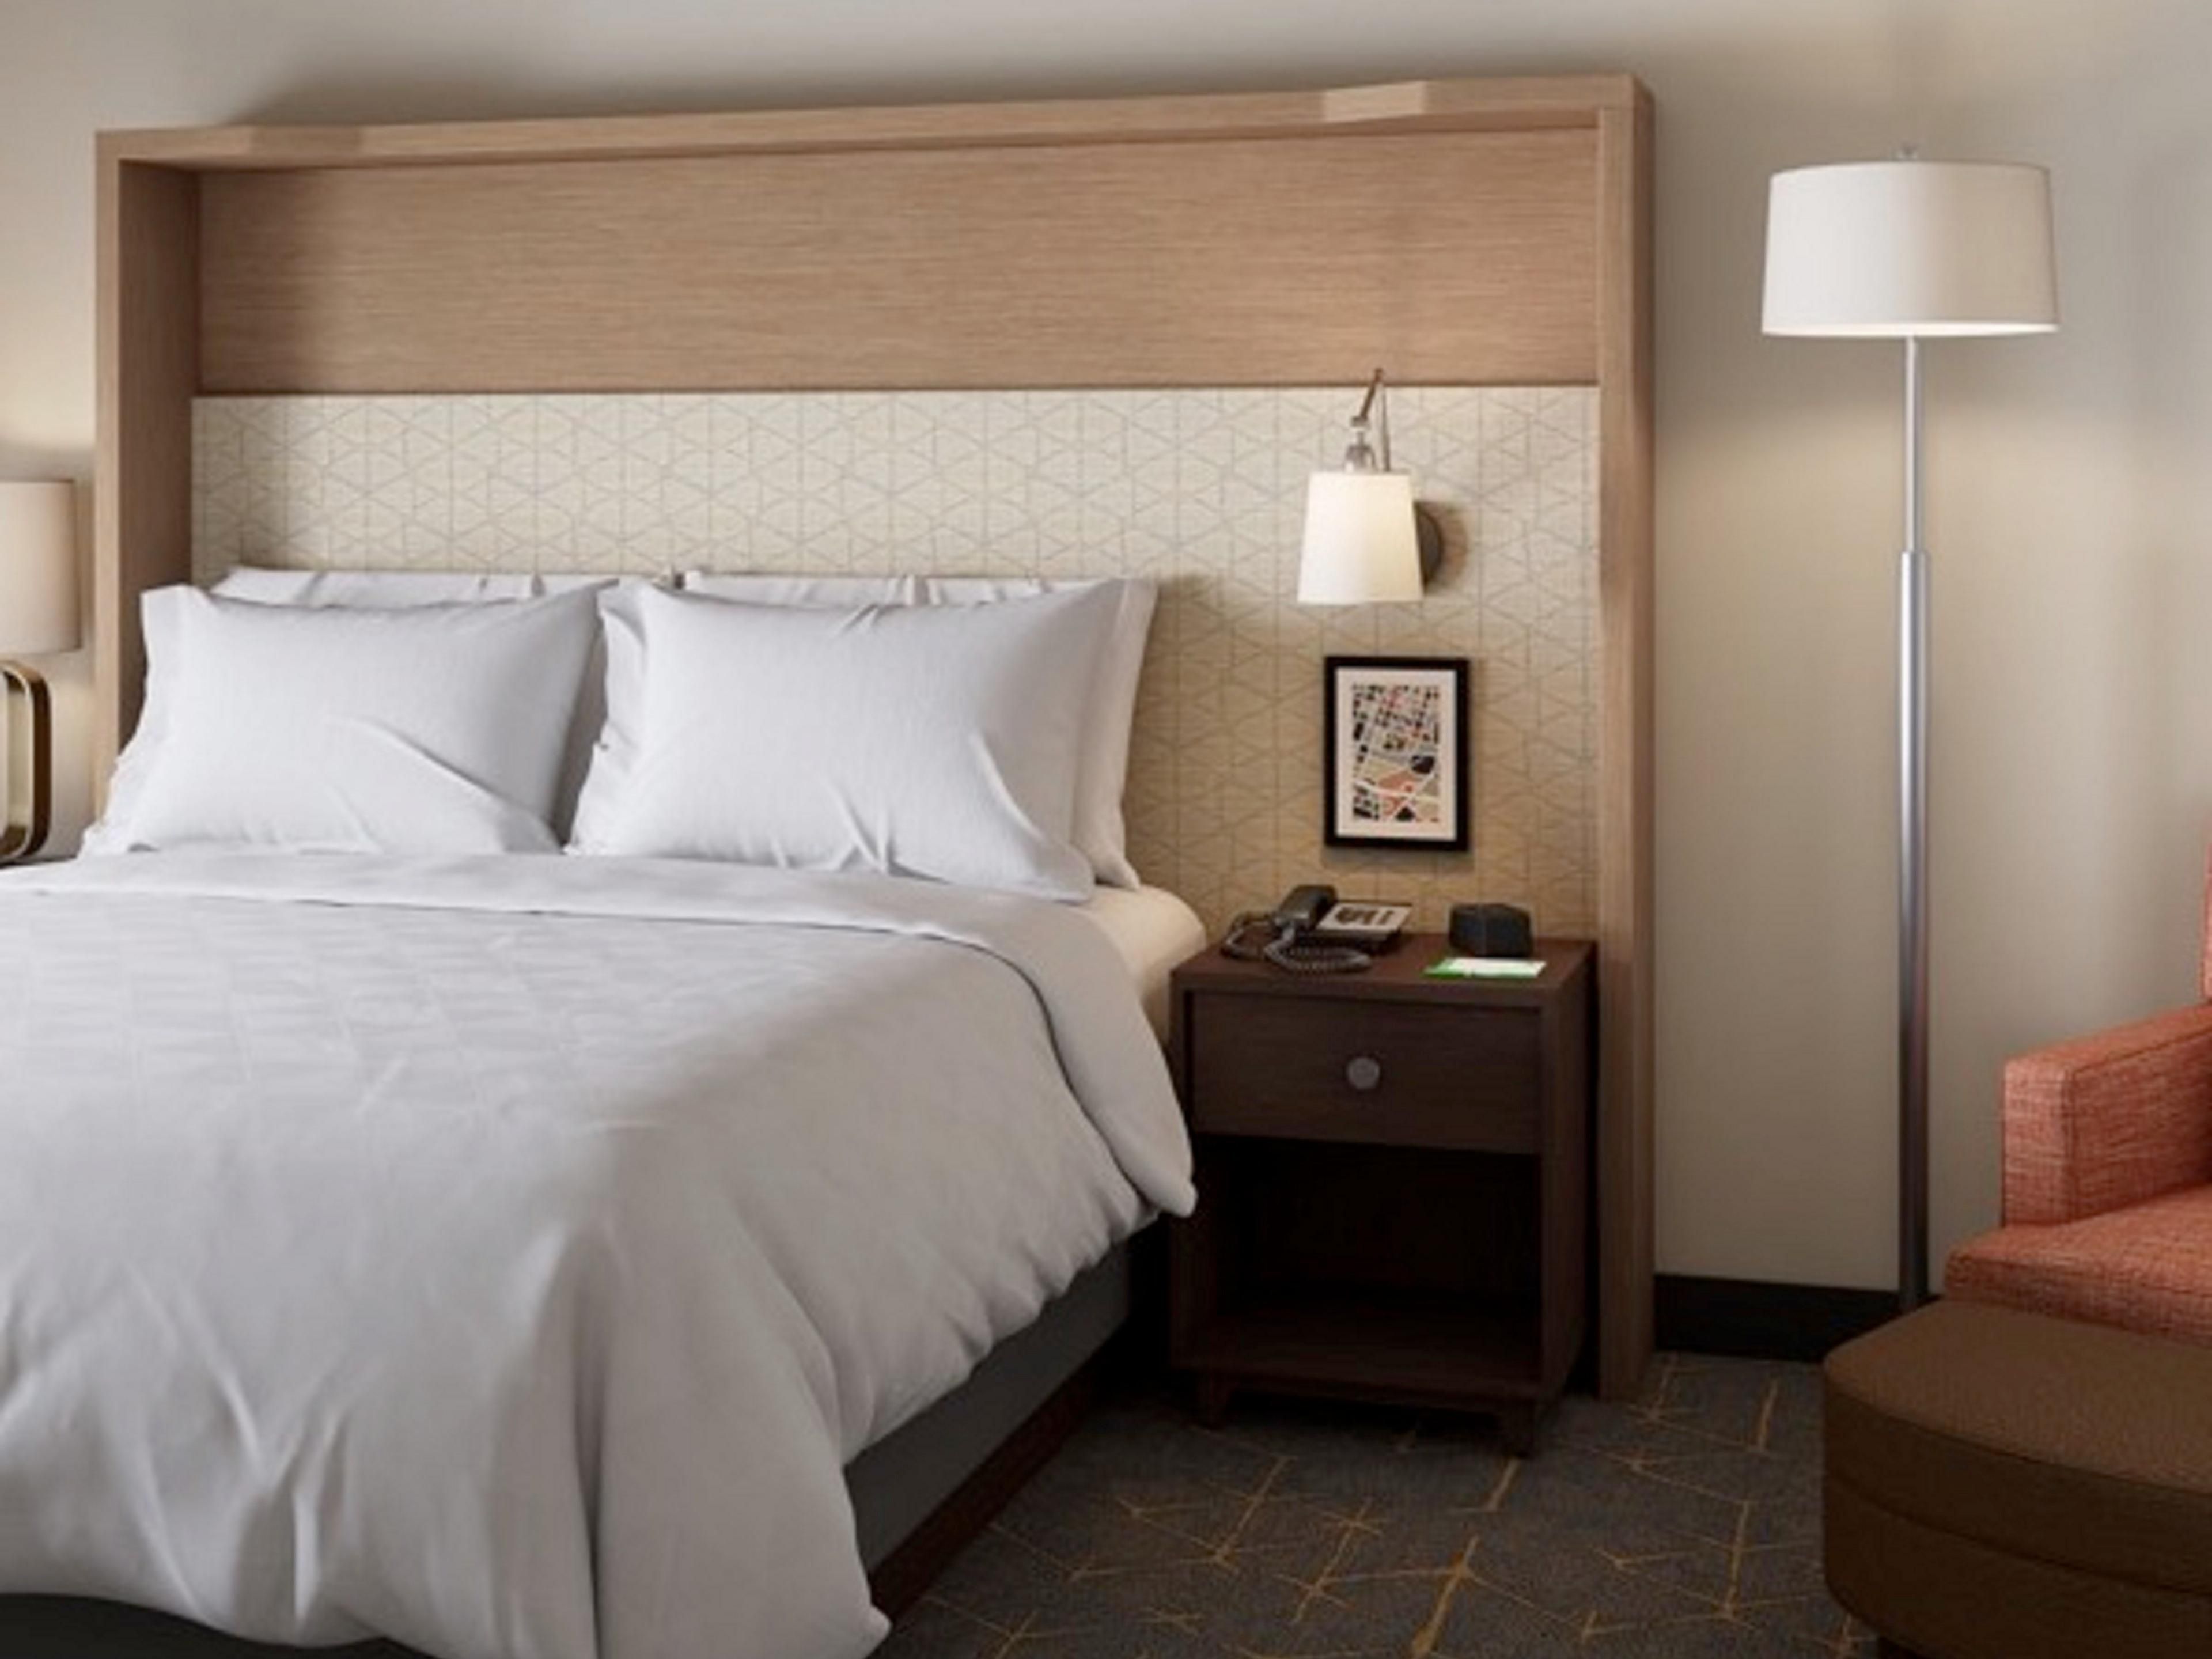 Stay in our newly remodeled guest rooms, featuring a premium king bed with sleeper sofa, 2 queen beds, or a standard king, plus various suite options. Stay connected with free Wi-Fi, HDMI charging ports & a mobile desk. Feel at home with a mini-fridge & Keurig coffeemaker. Refresh in the stylish, clean & bright bathrooms.